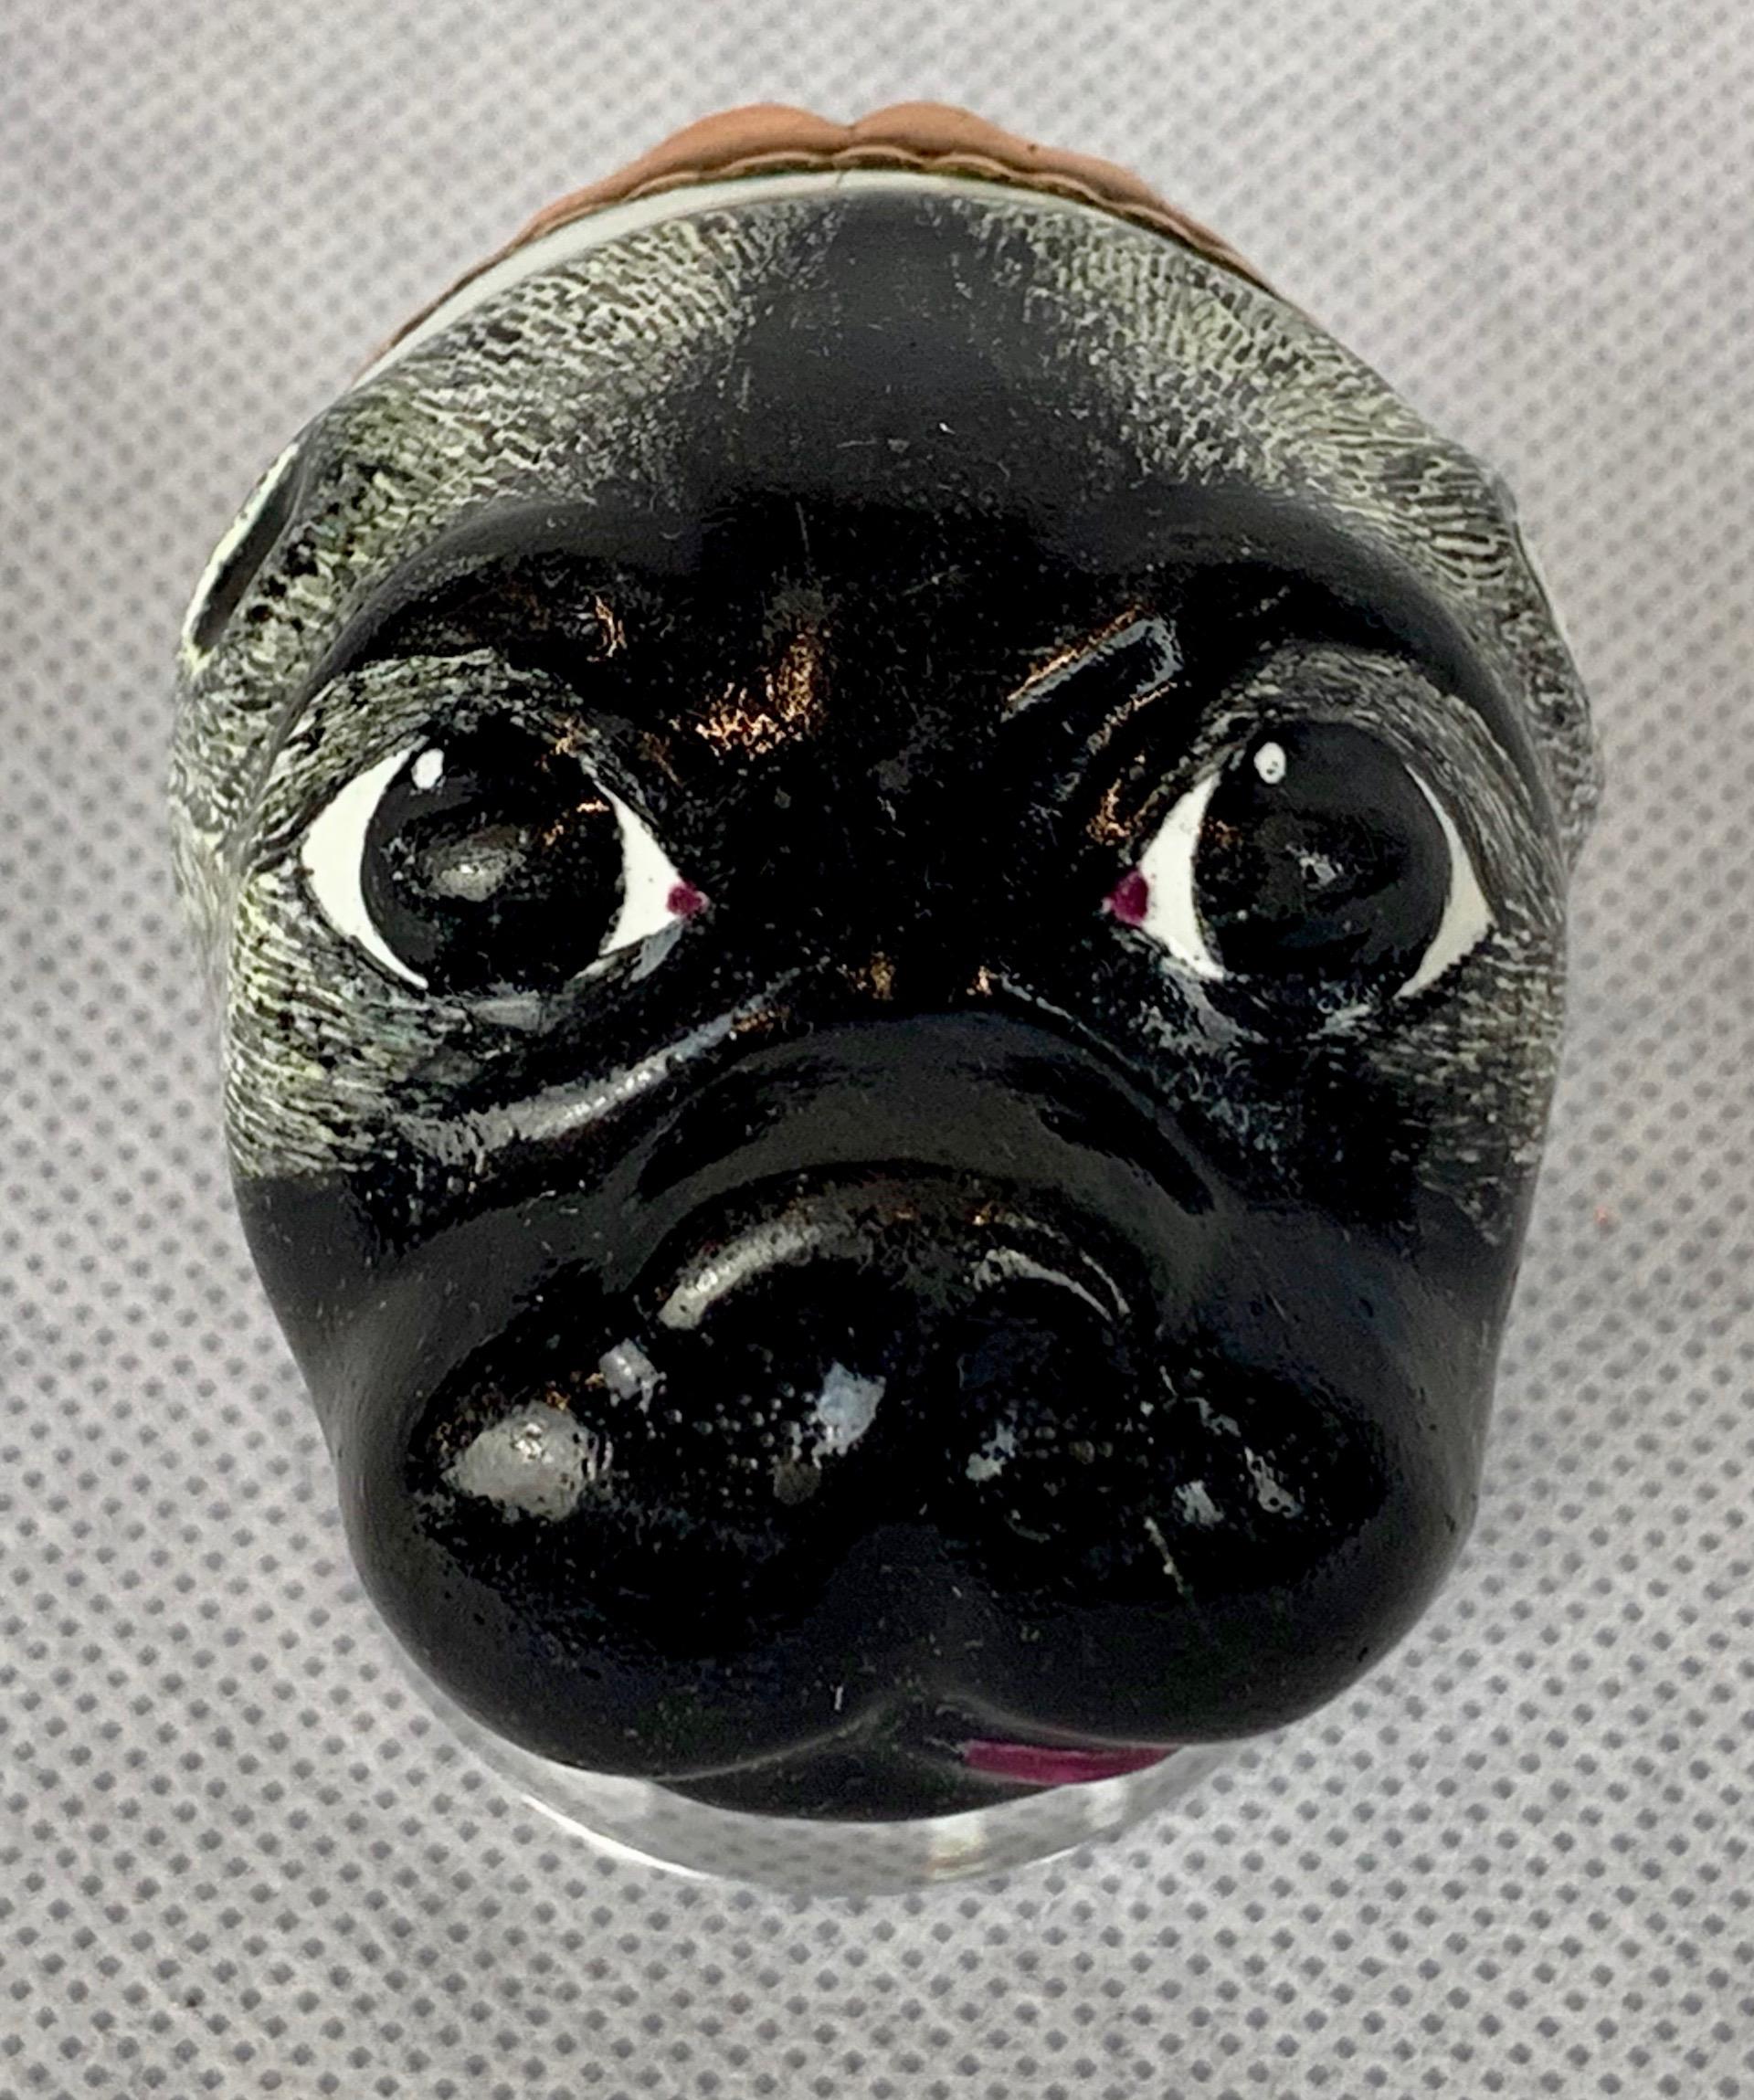 Rare 18th century Pug bonbonniere. Probably Bilston Battersea enamel on copper with a hinged cover. The pug is painted black with a bright pink tongue. The cover depicts a woman in a pink dress holding a rifle. The inside shows the same woman